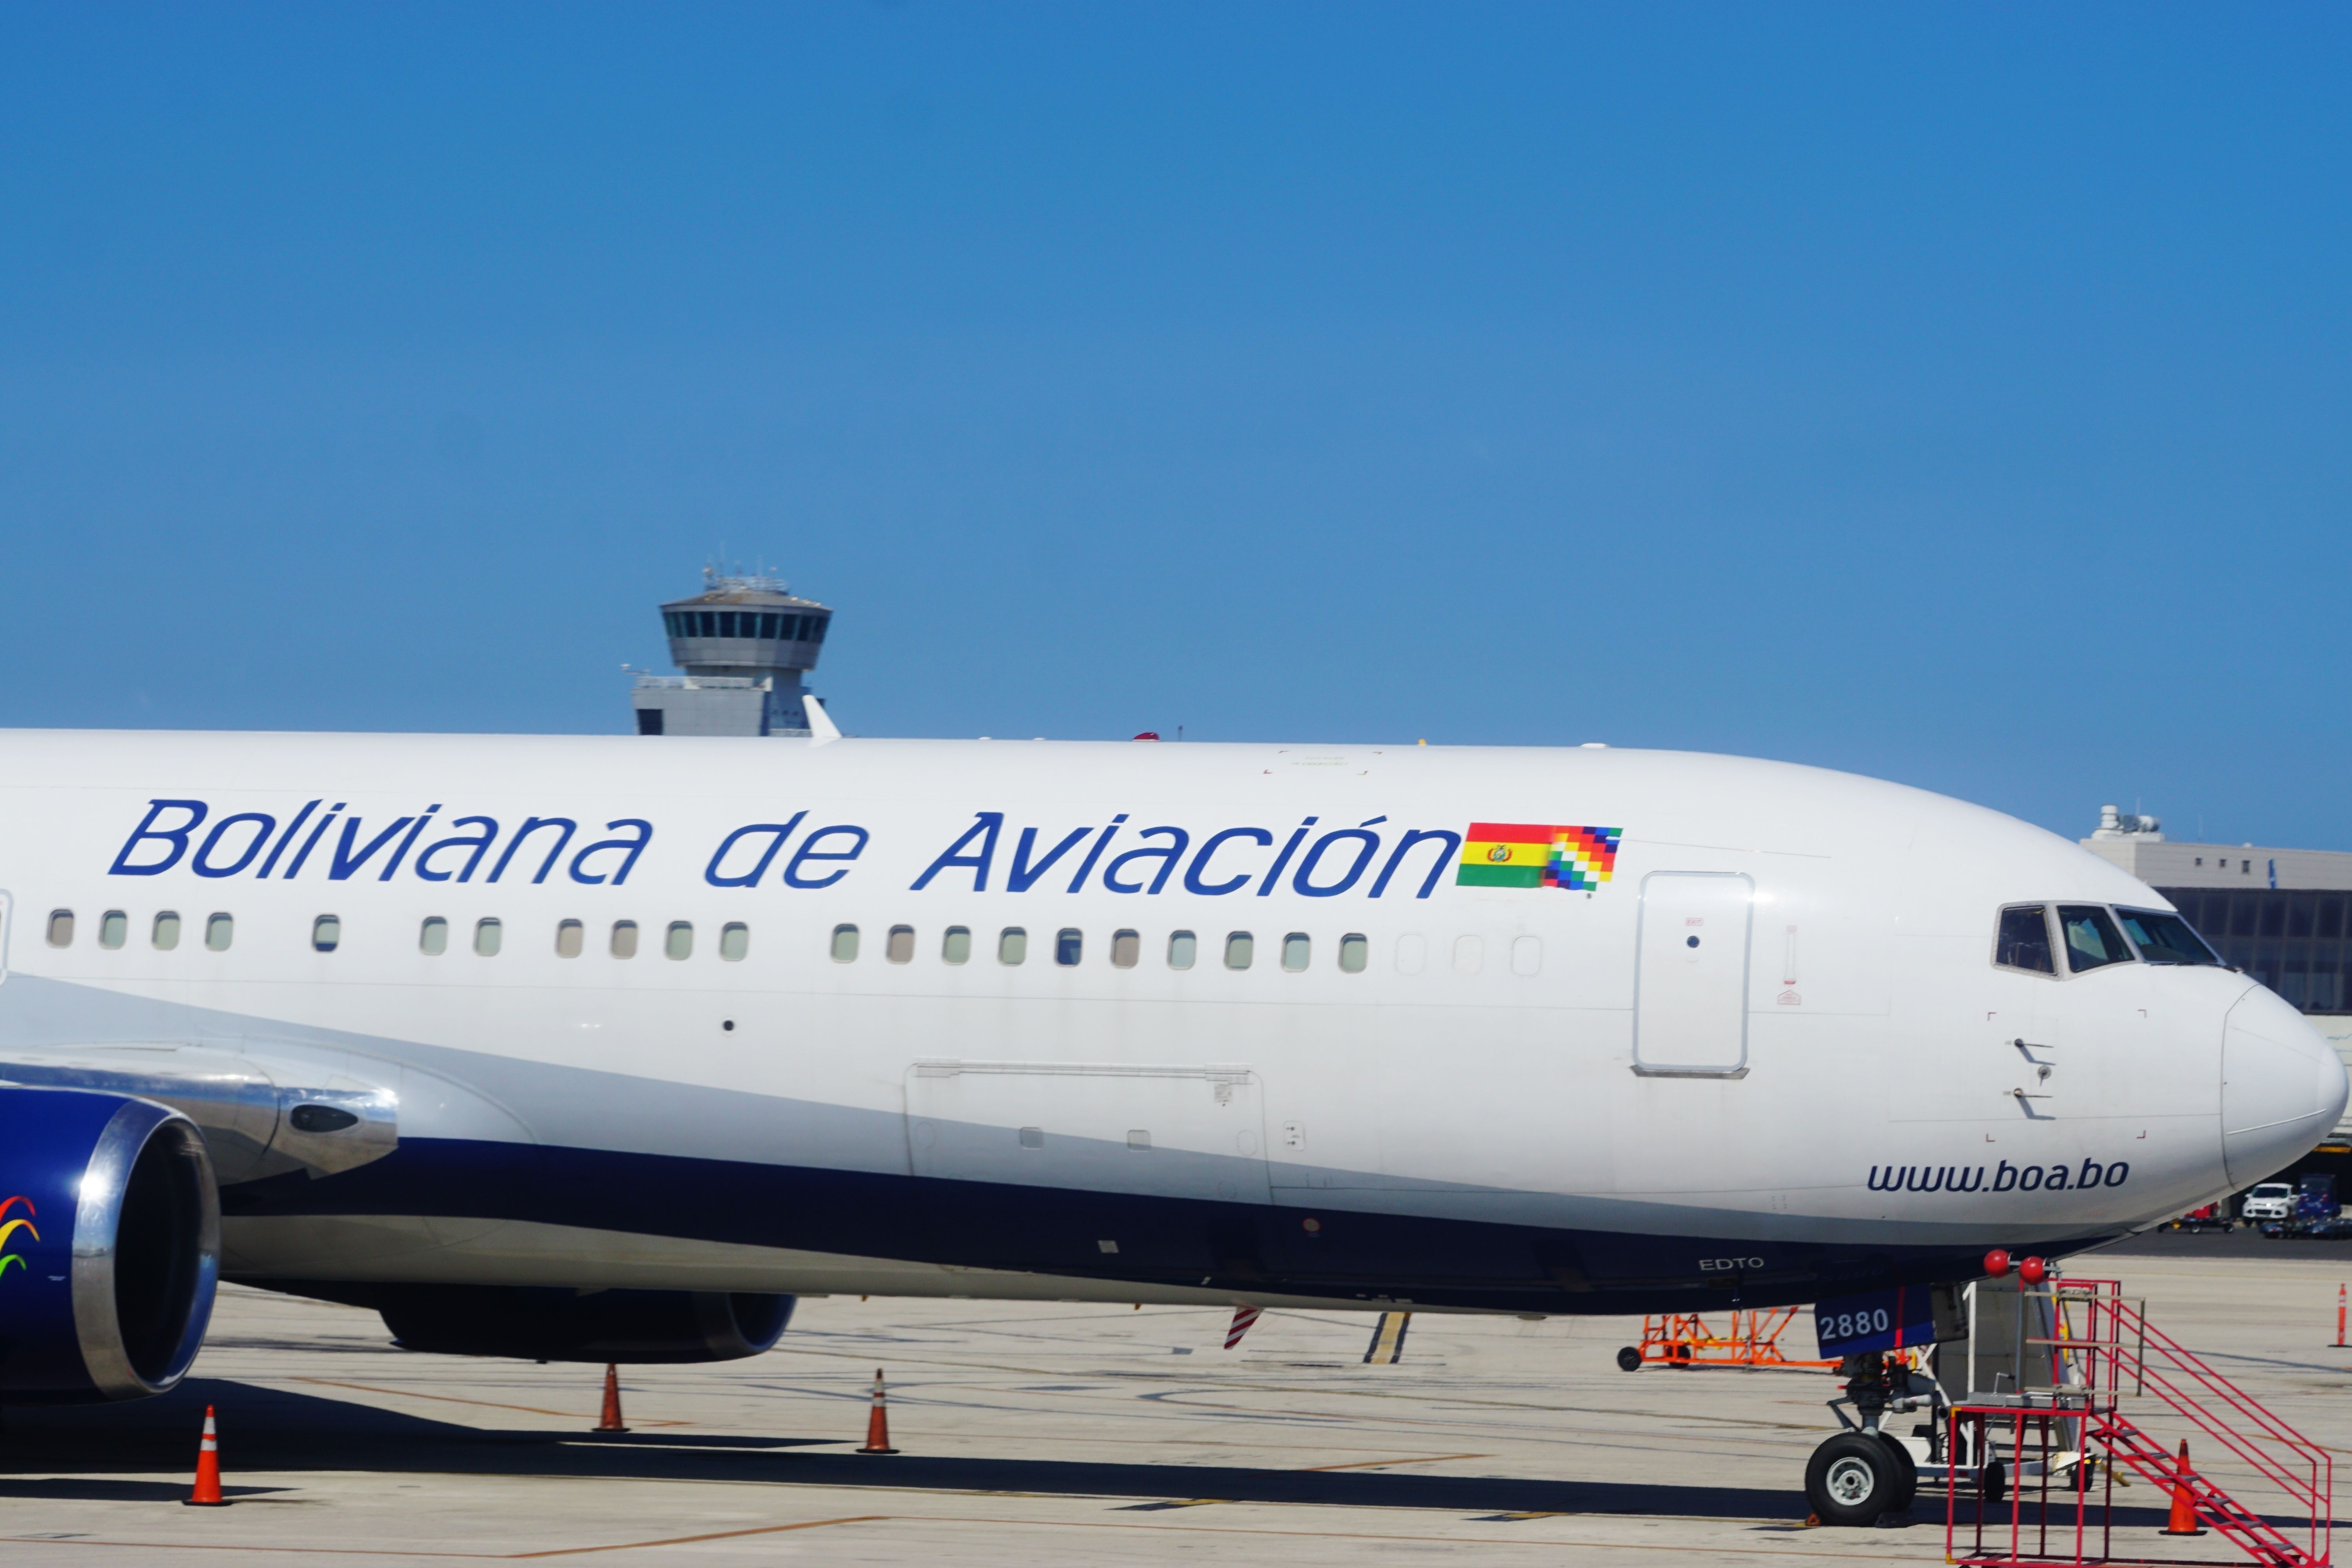 An airplane from Boliviana de Aviacion (OB), the flag carrier airline of Bolivia, at the Miami International Airport (MIA).